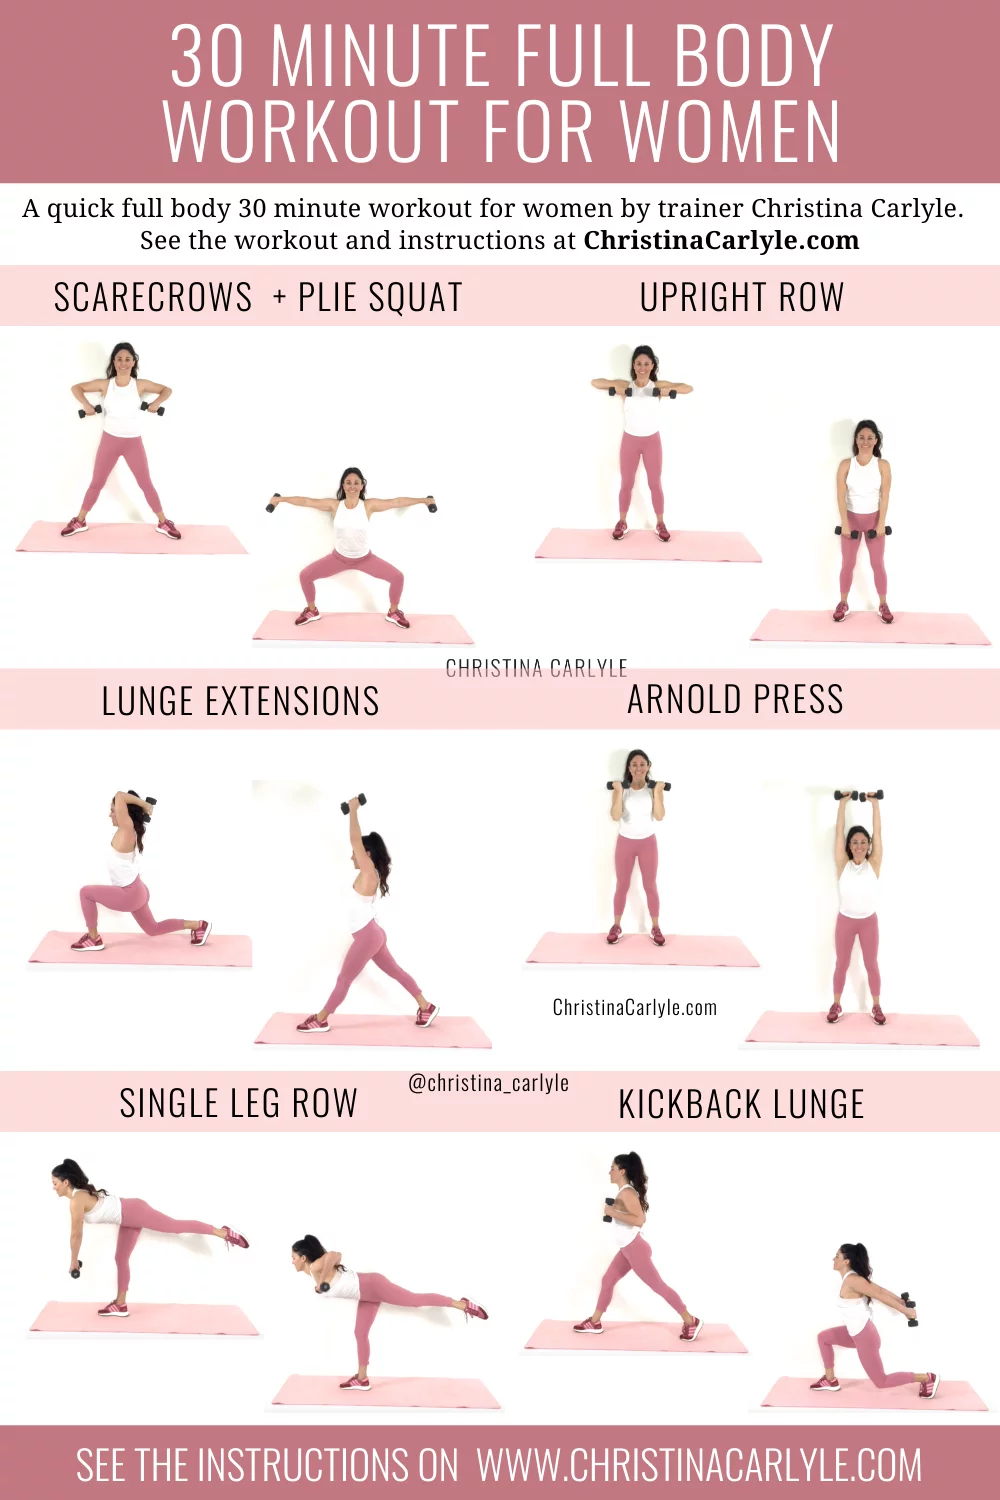 6 exercises in a 30 minute Workout routine being done by Trainer Christina Carlyle and text that says 30 Minute Full Body Workout for Women